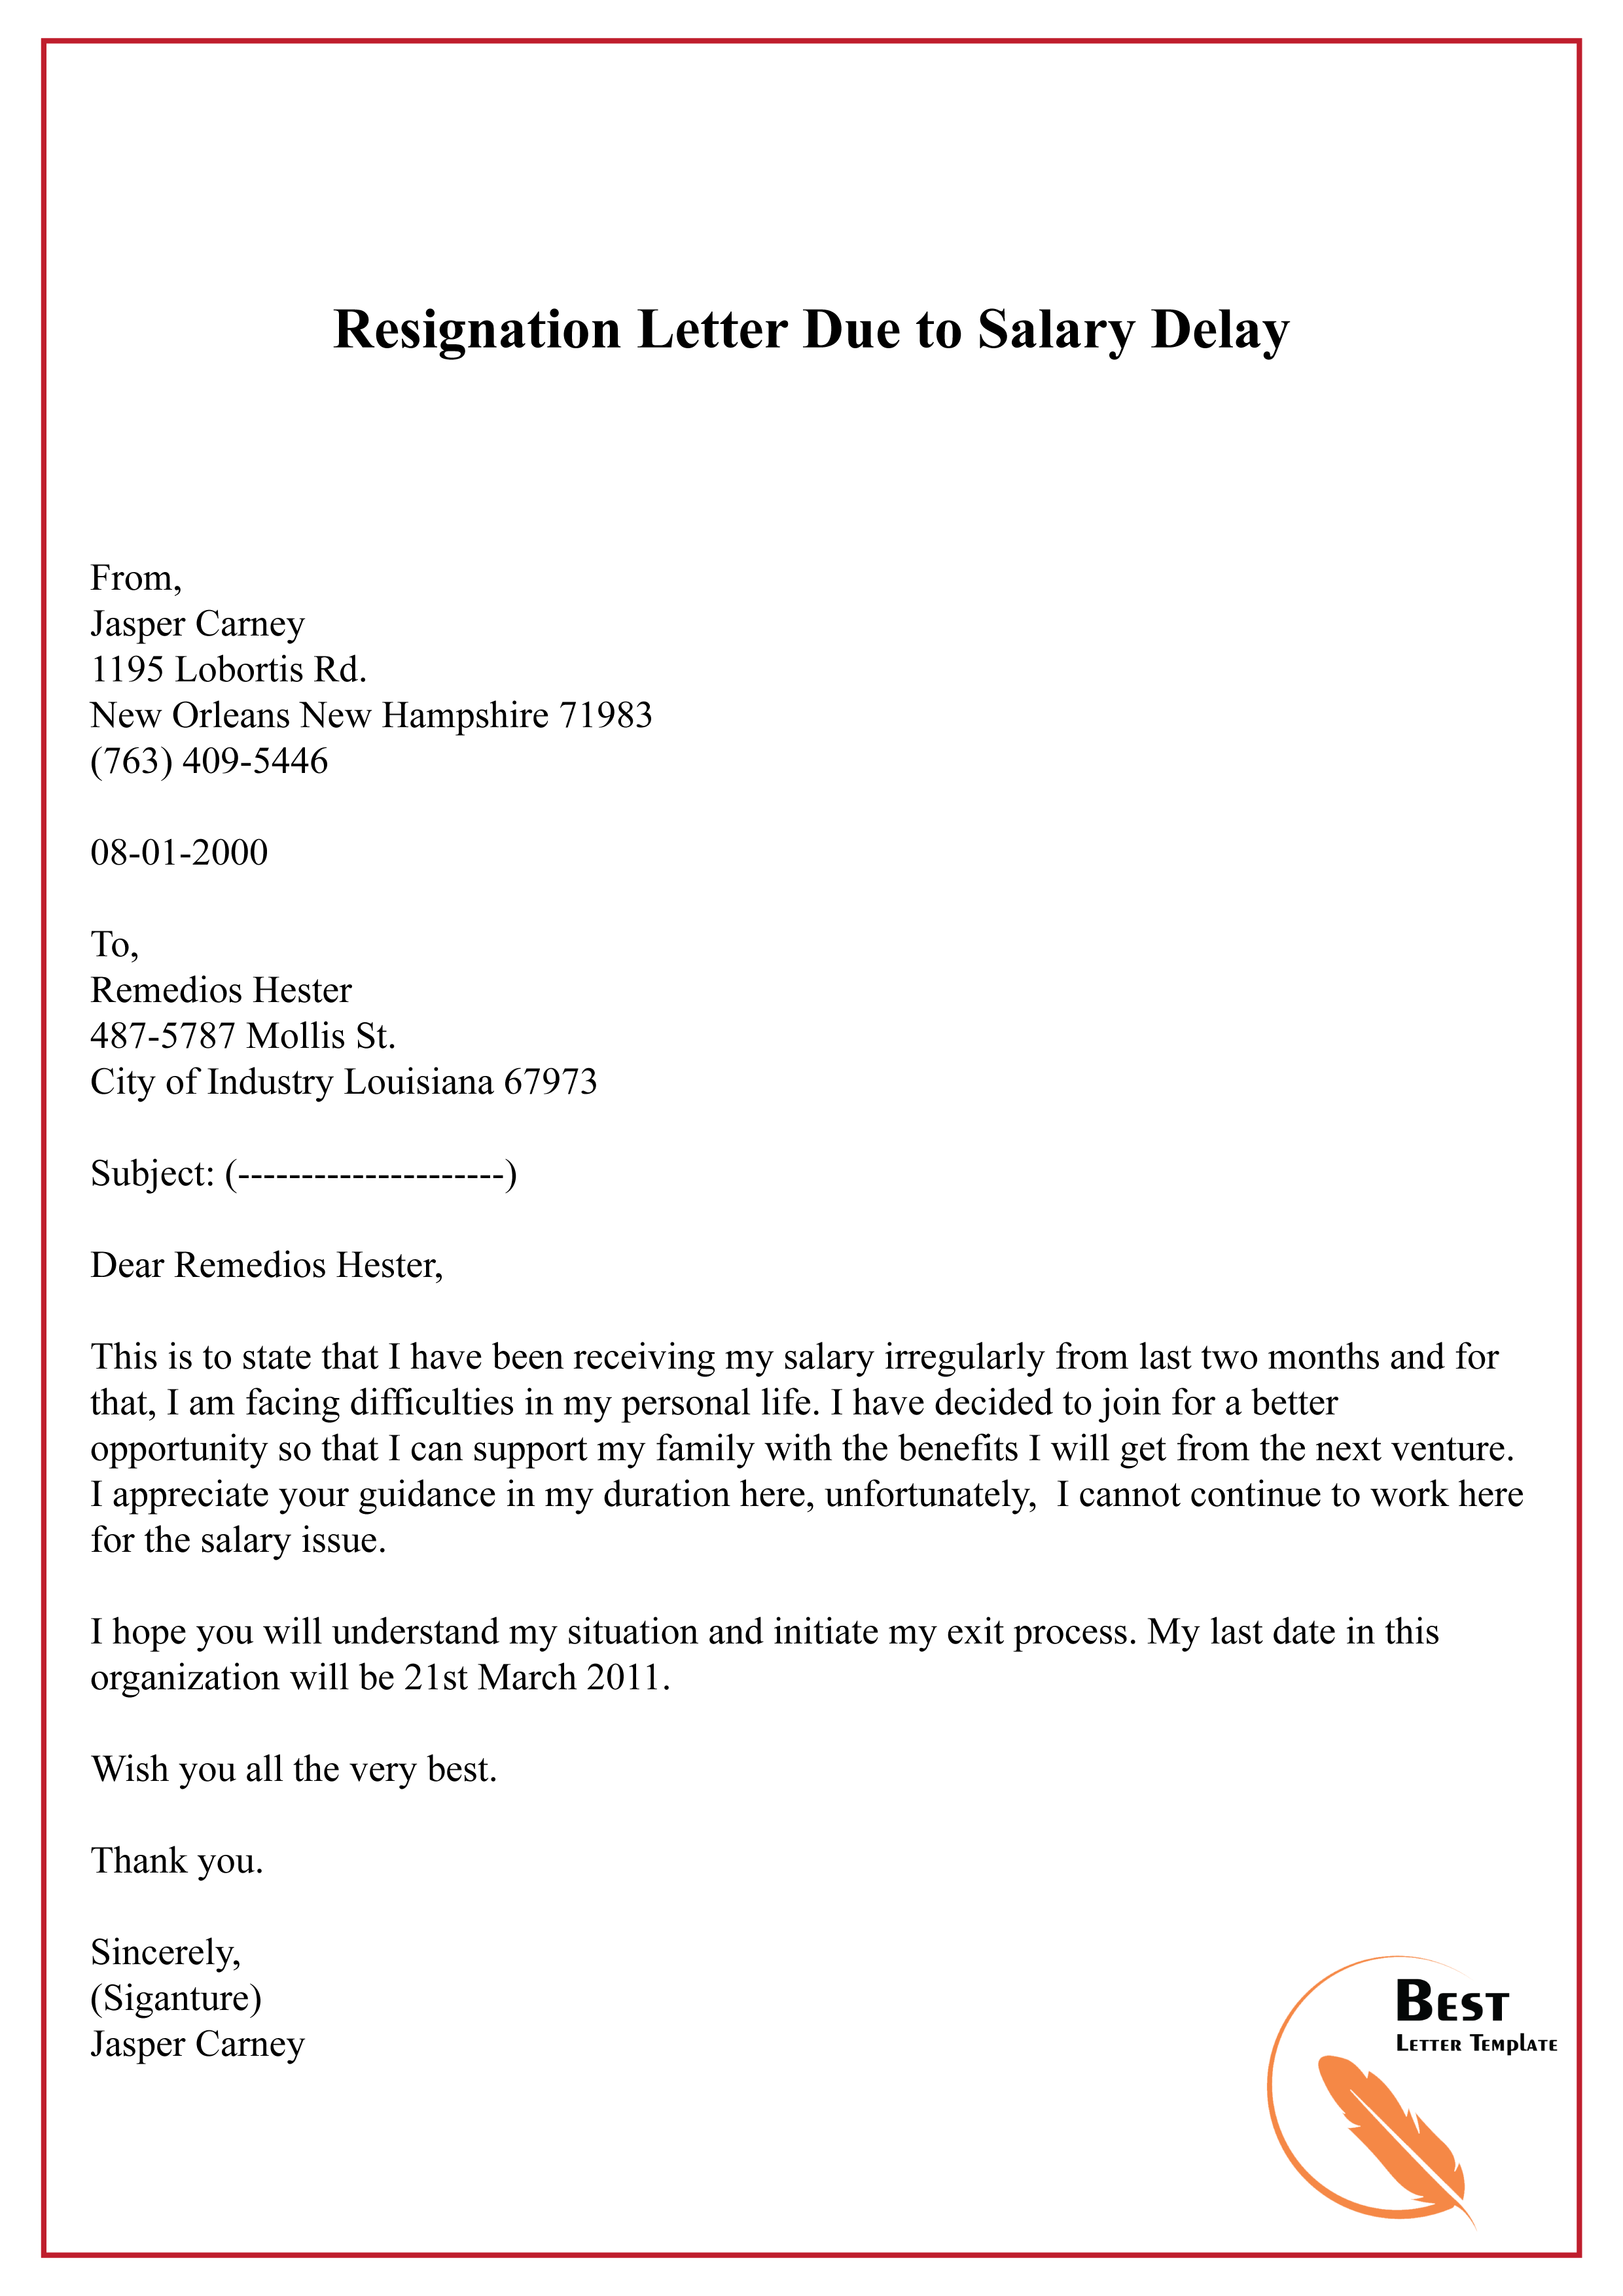 resignation letter format with request for experience certificate